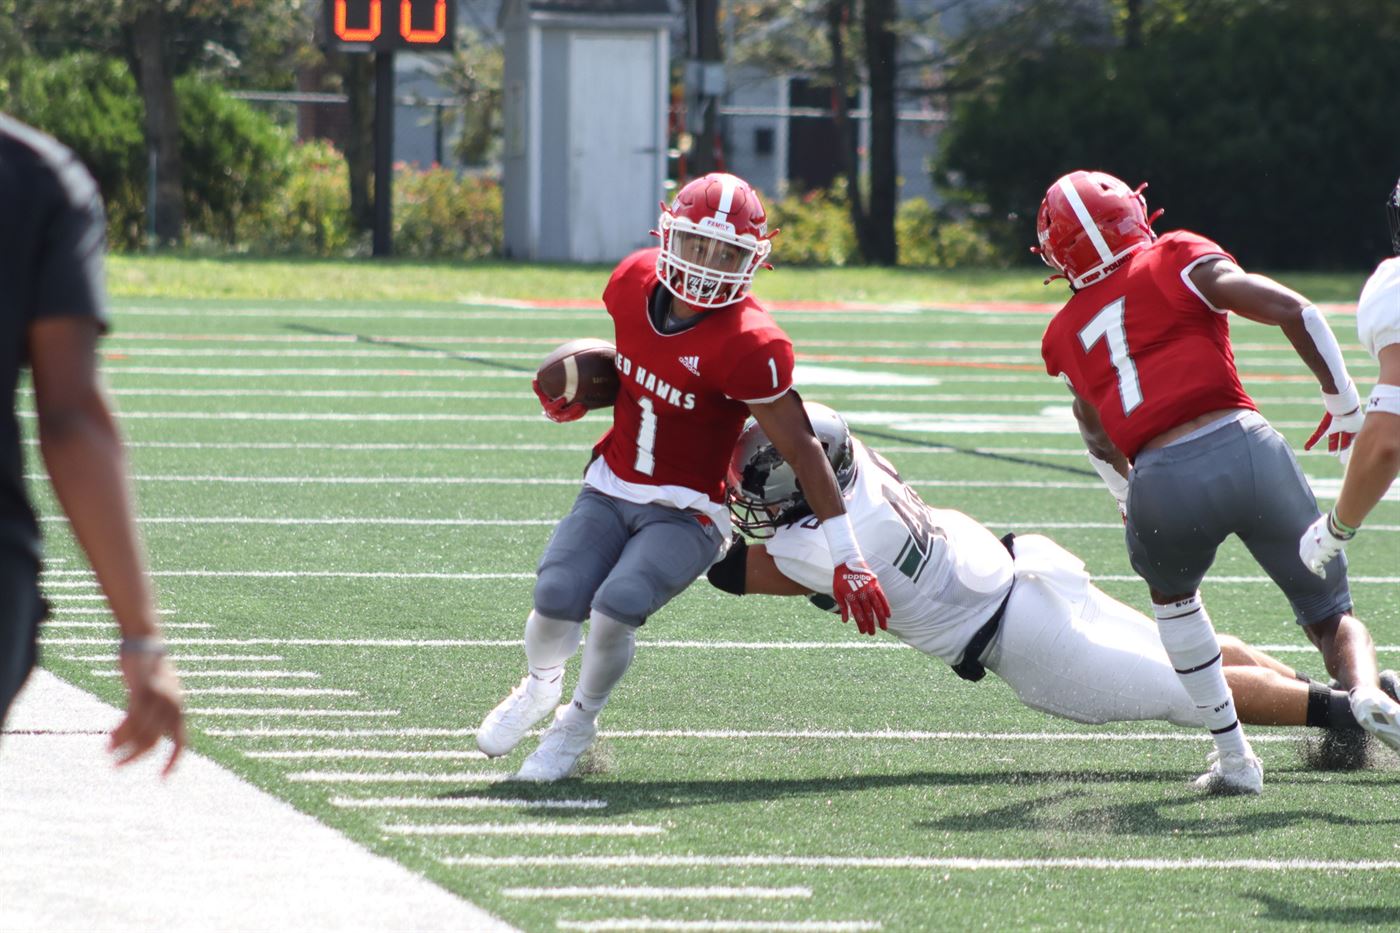 Makai Mickens led the rush attack in the game, but it unfortunately was not enough for the win. Trevor Geisberg | The Montclarion